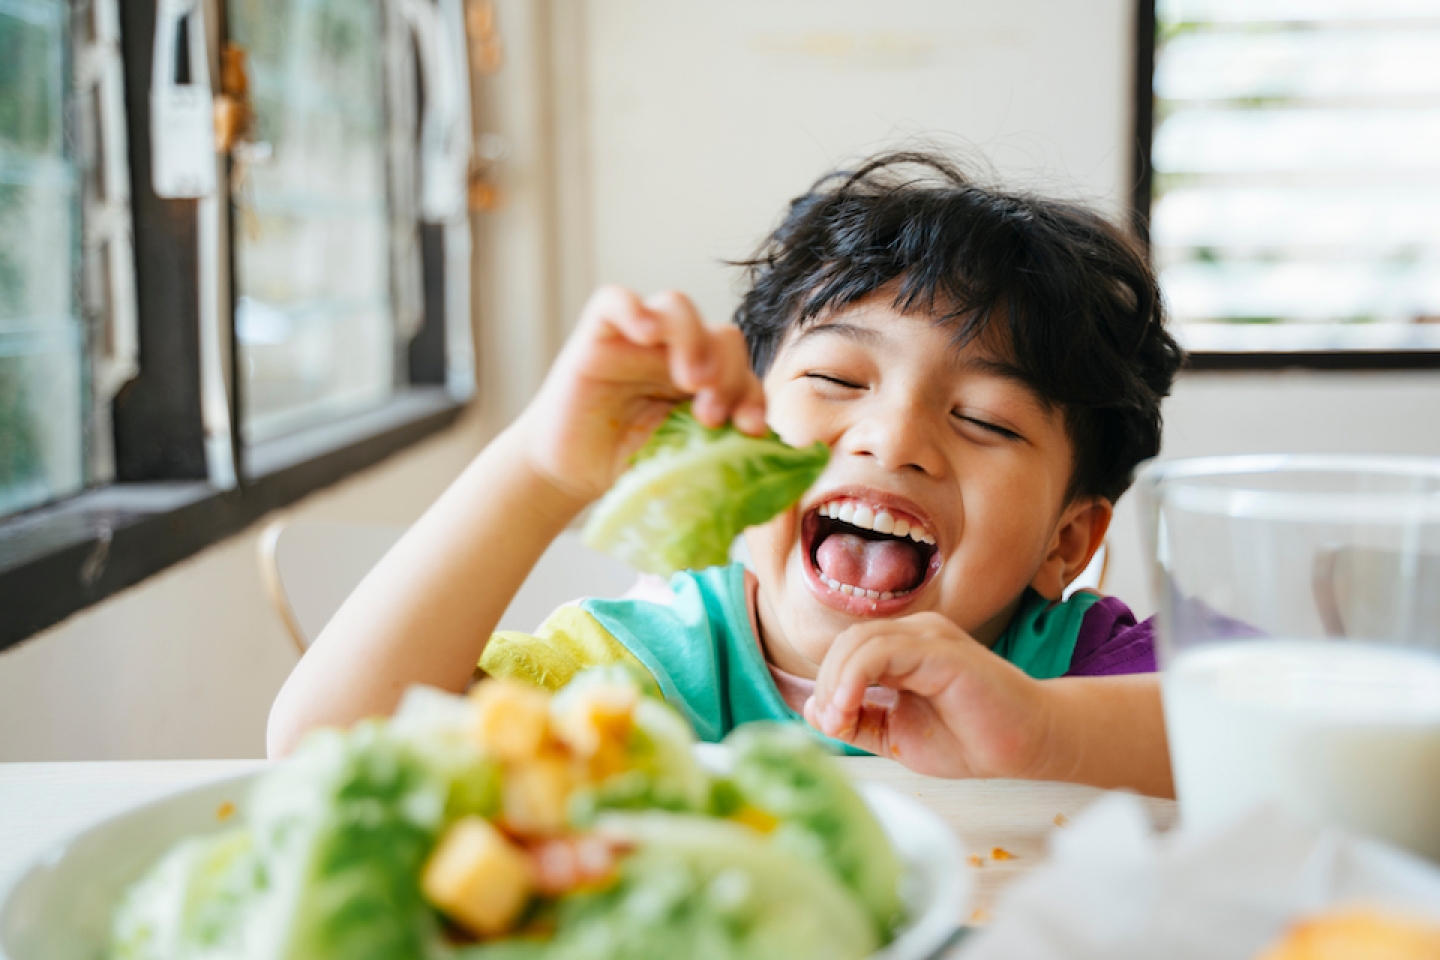 Nutrients you should add in your child’s meal